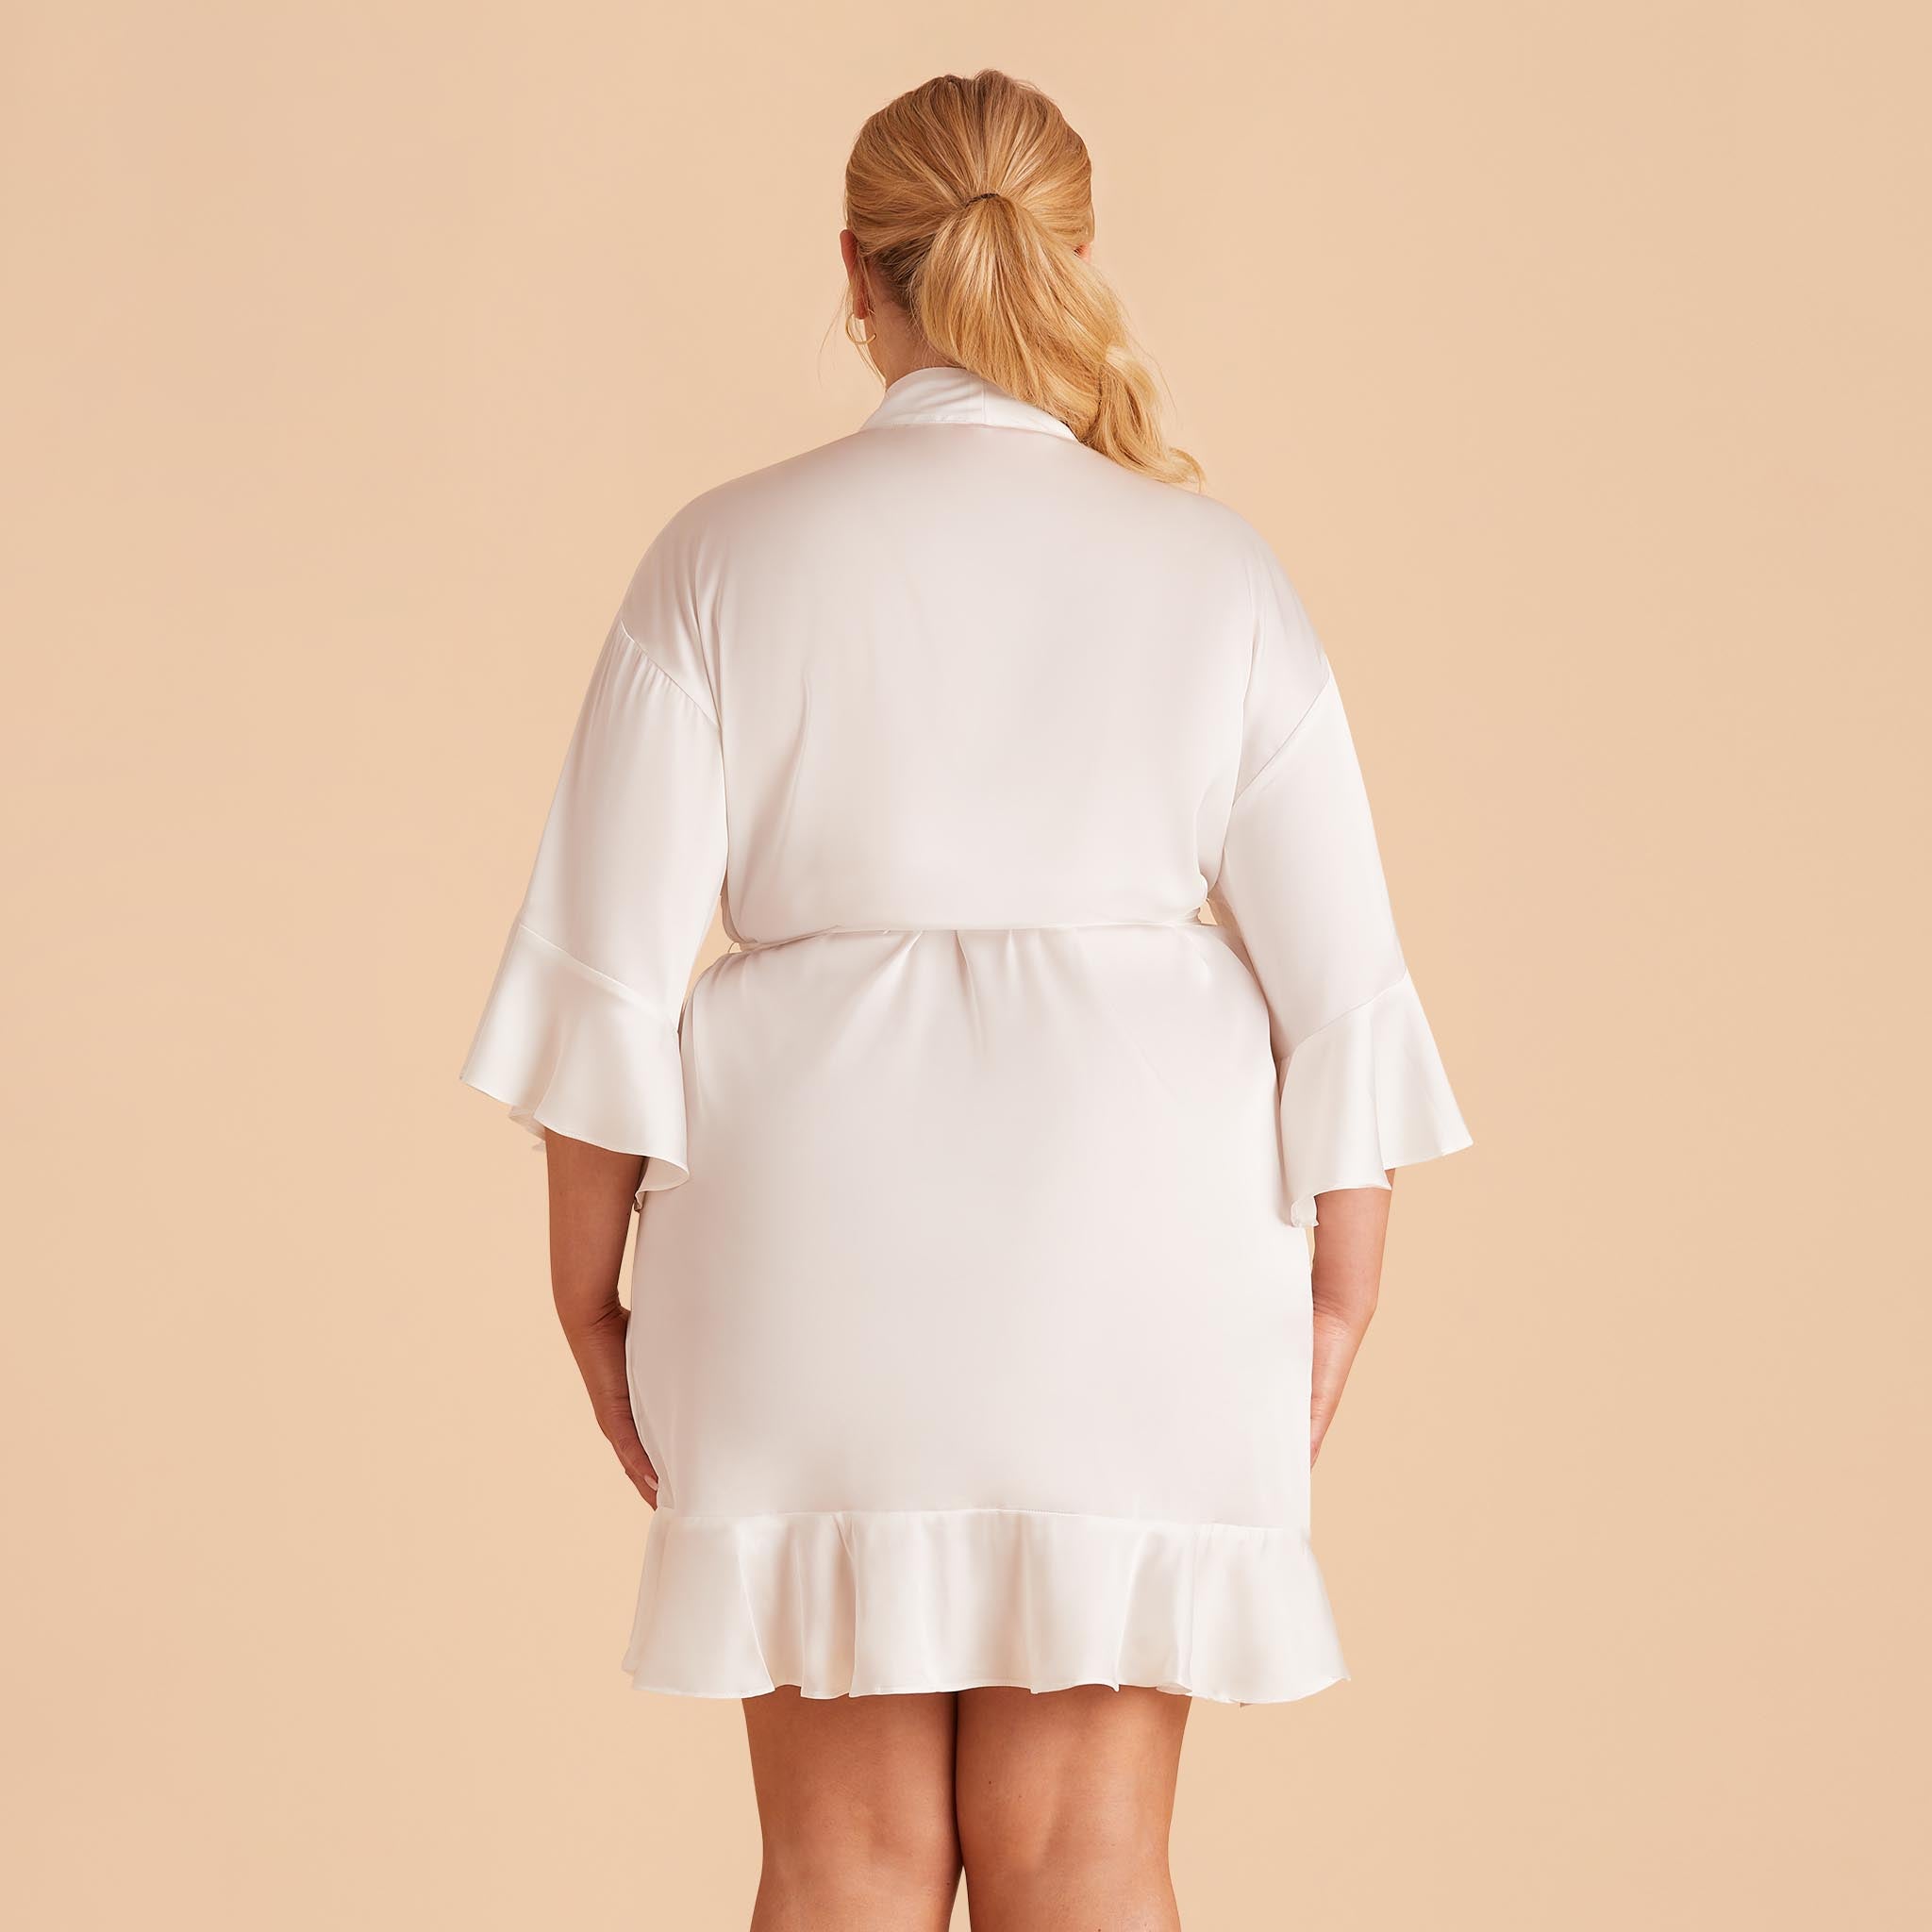 Kenny Ruffle Robe in ivory satin by Birdy Grey, back view